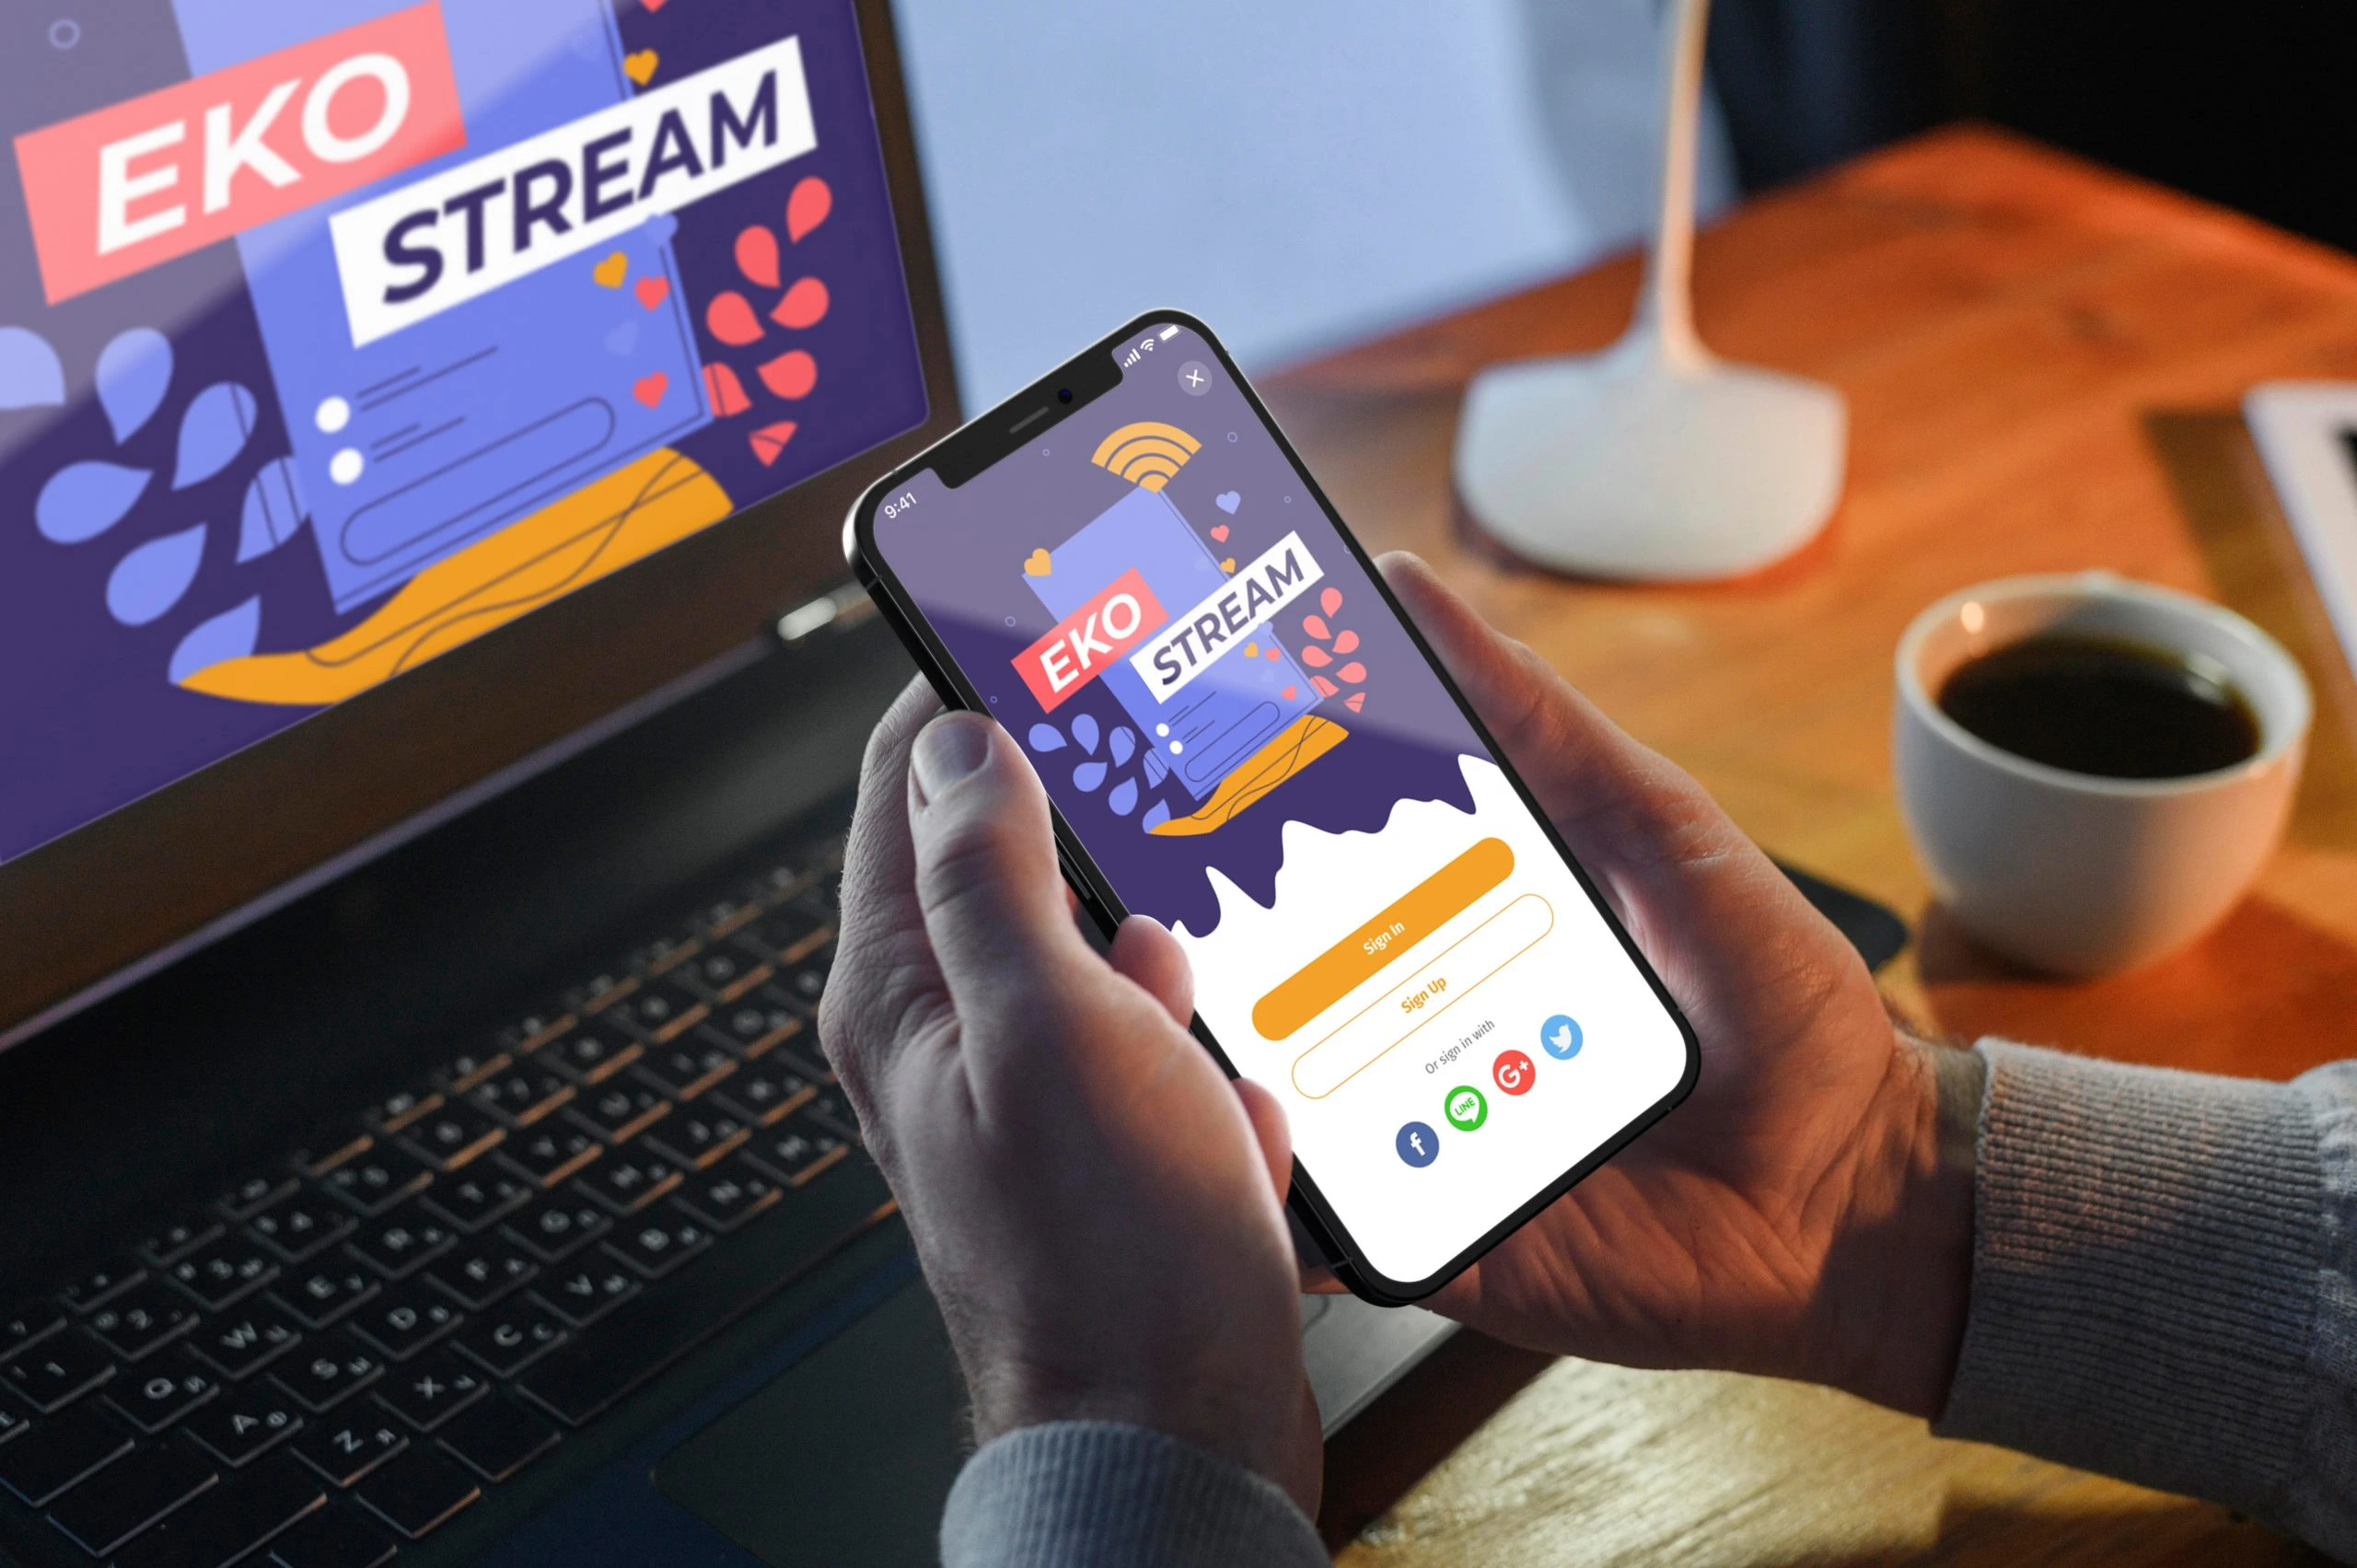 Steps to Create a Live Streaming Apps &#8211; EkoStream Case Study